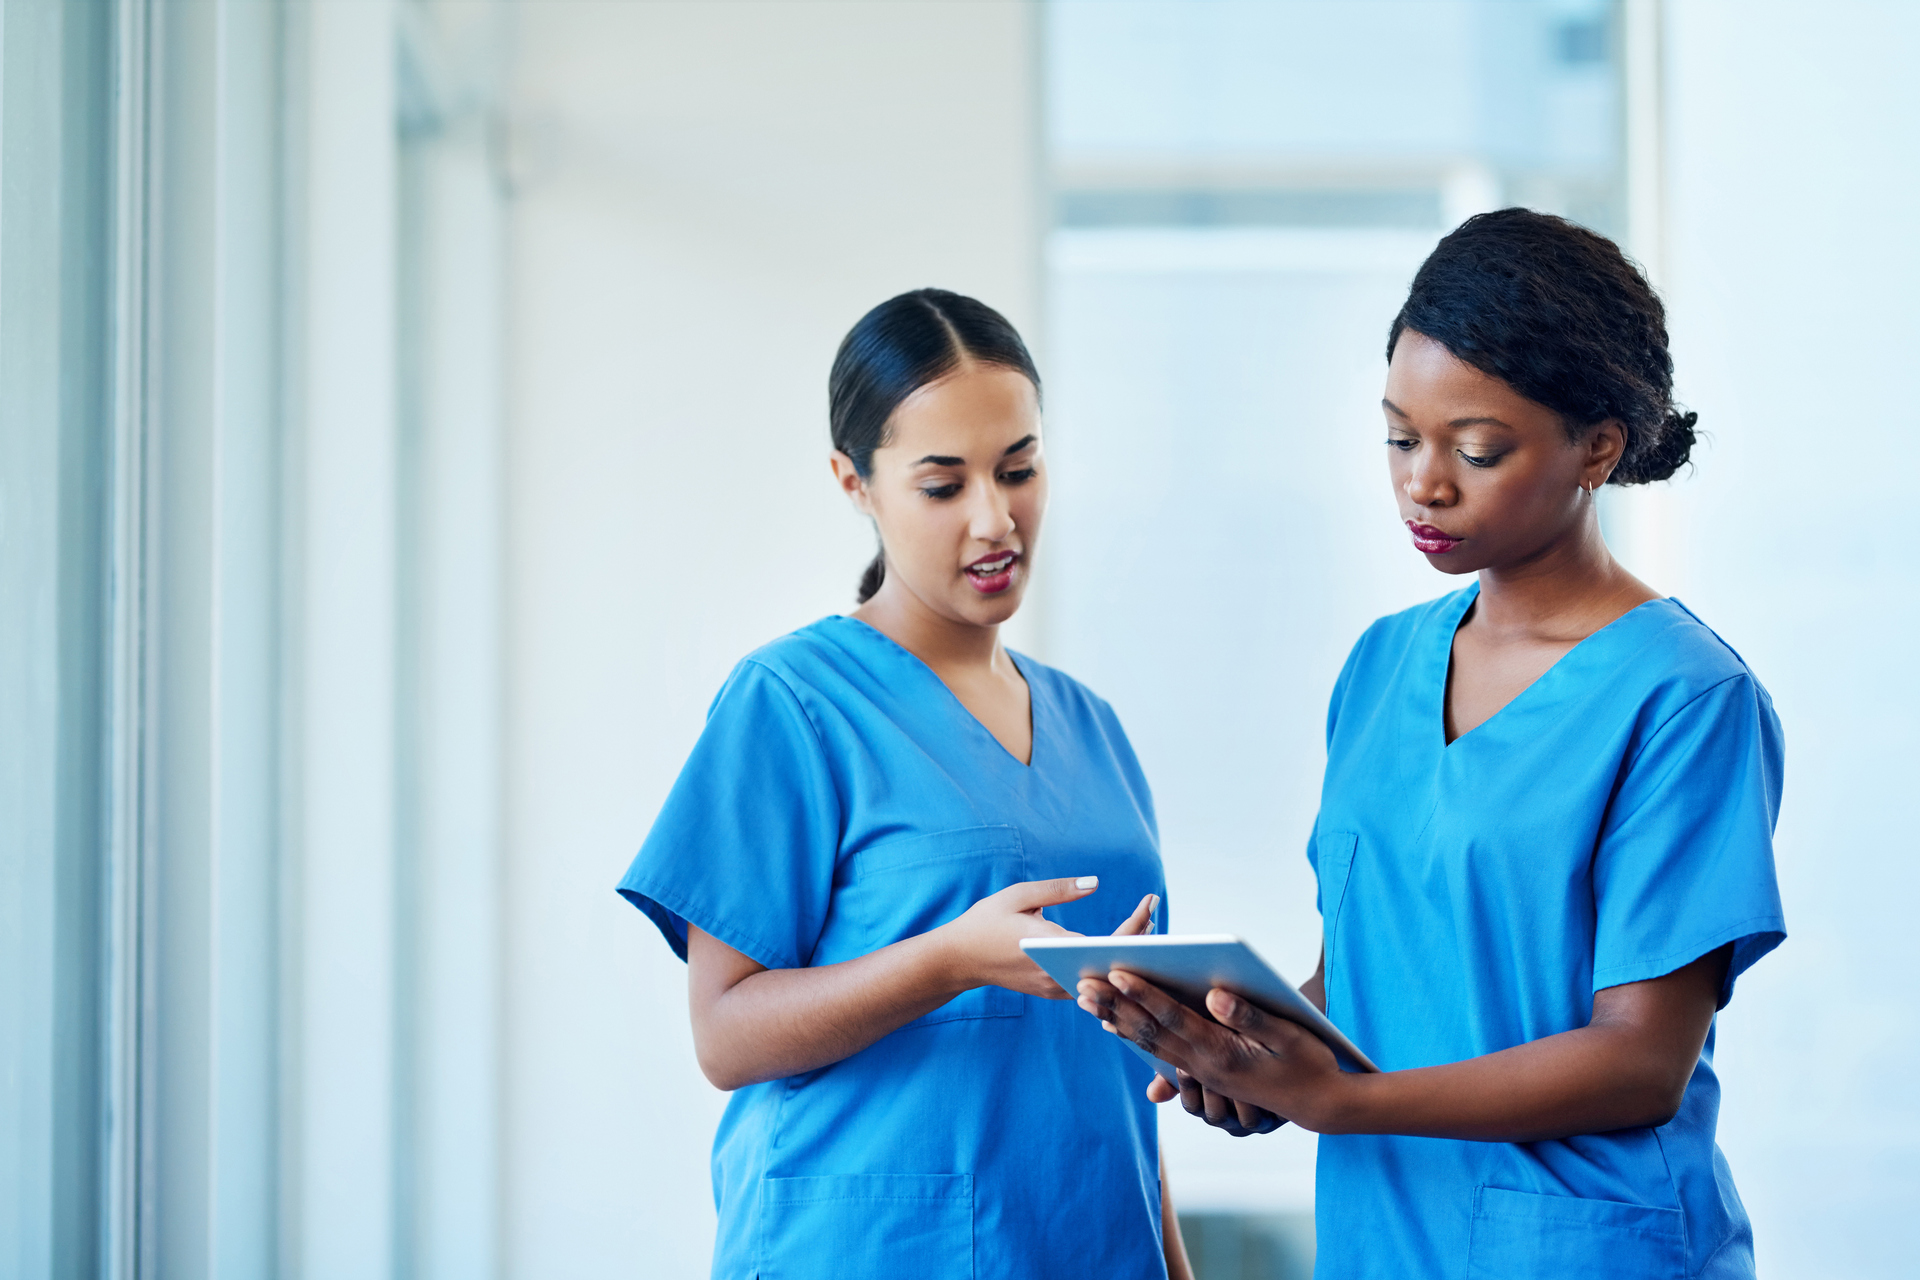 Two nurses wearing blue scrubs discuss patient record on tablet